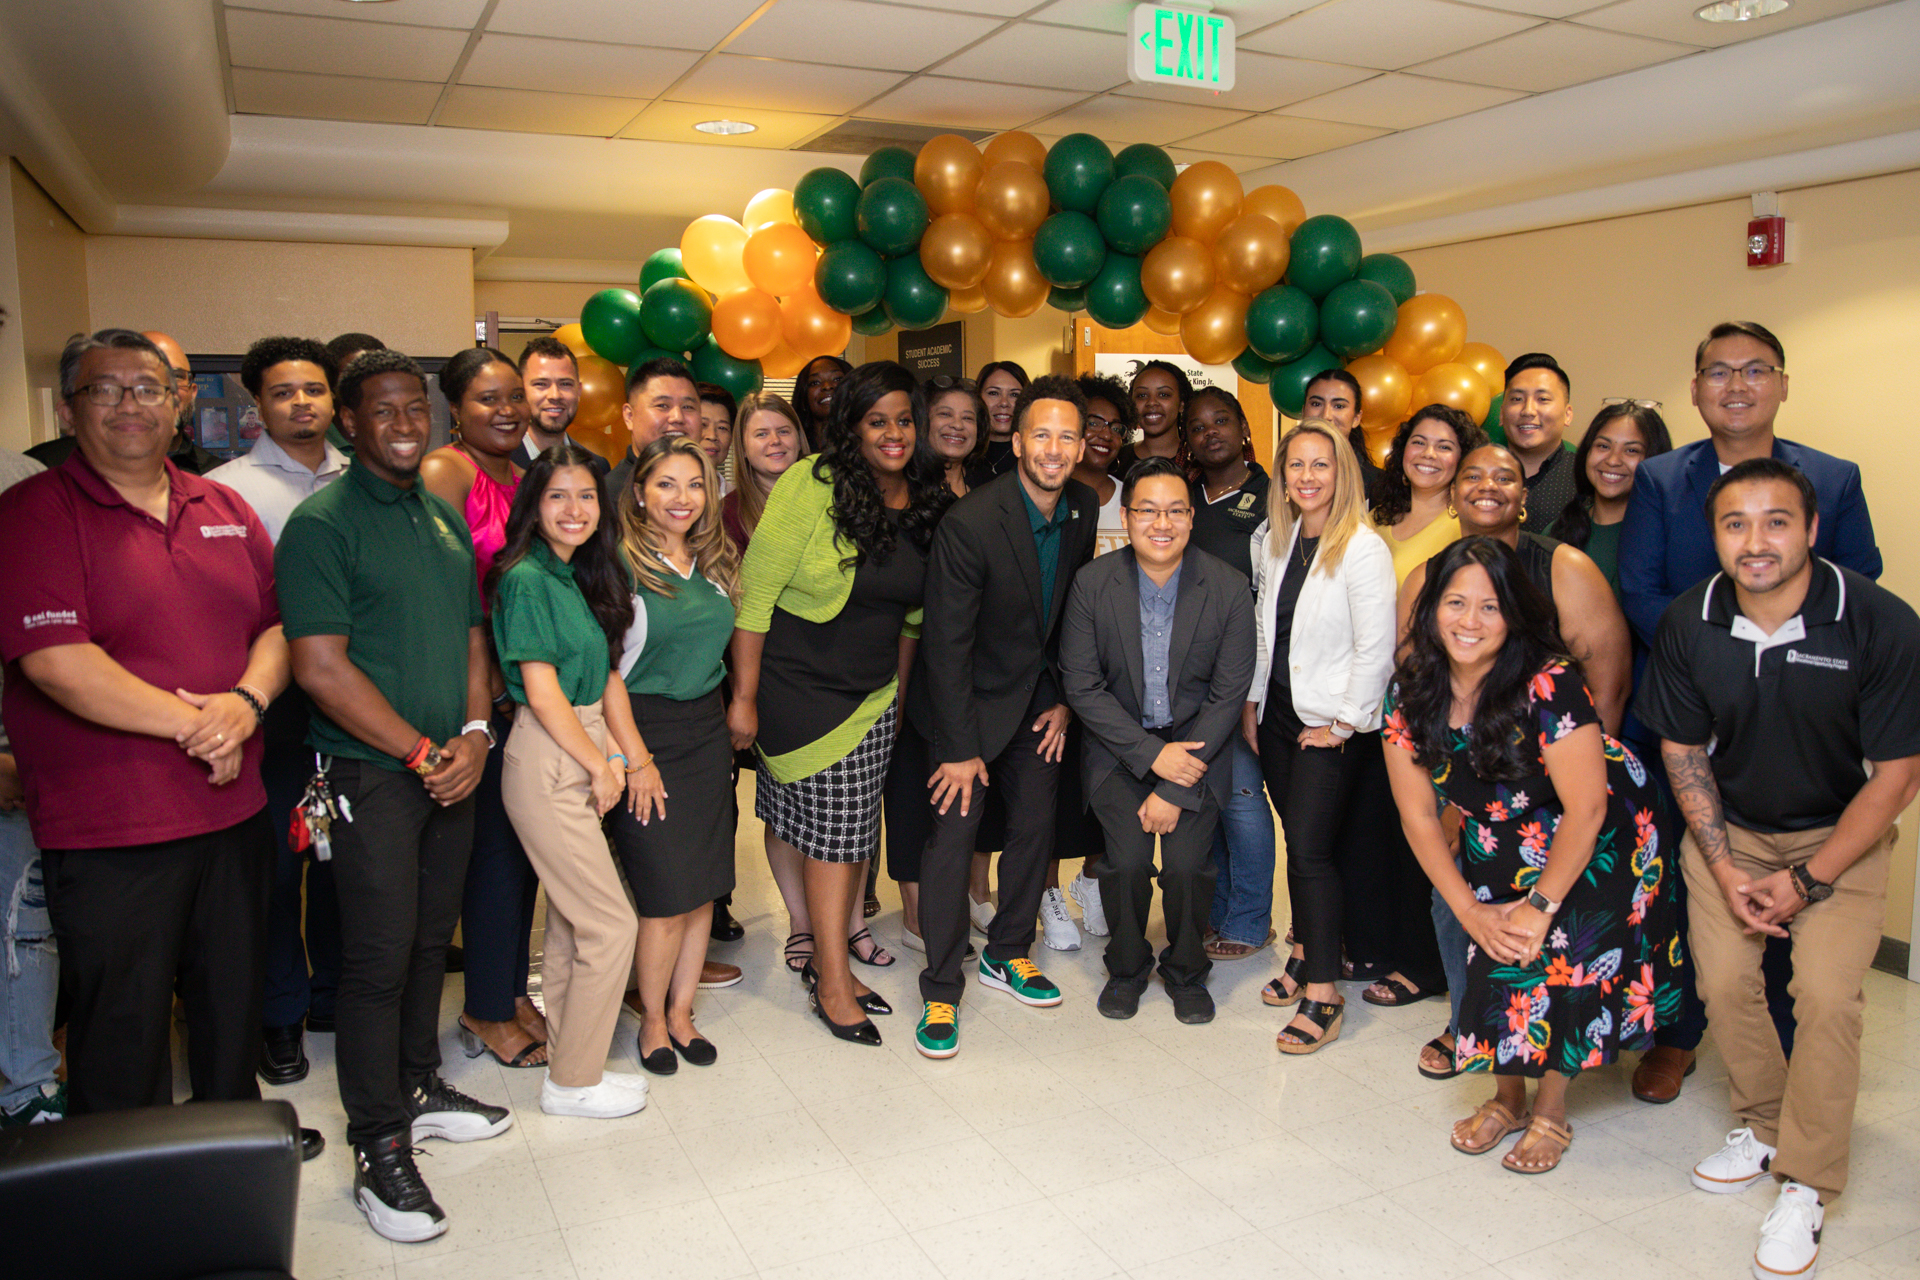 President Luke Wood poses for a photo with students and staff, beneath a green and gold balloon arch.